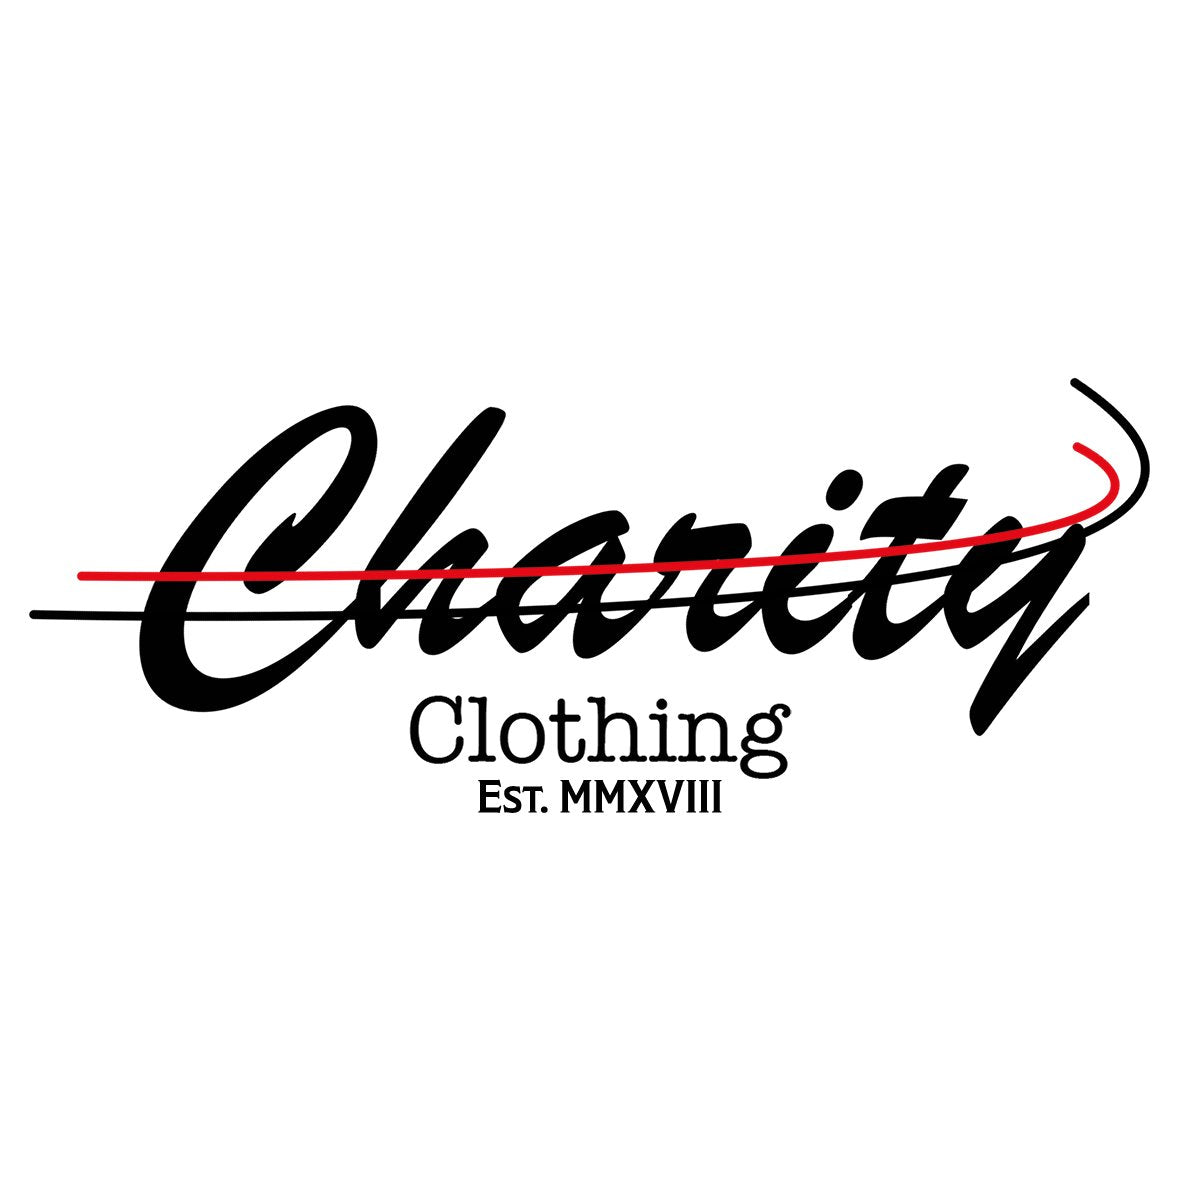 Charity Clothing